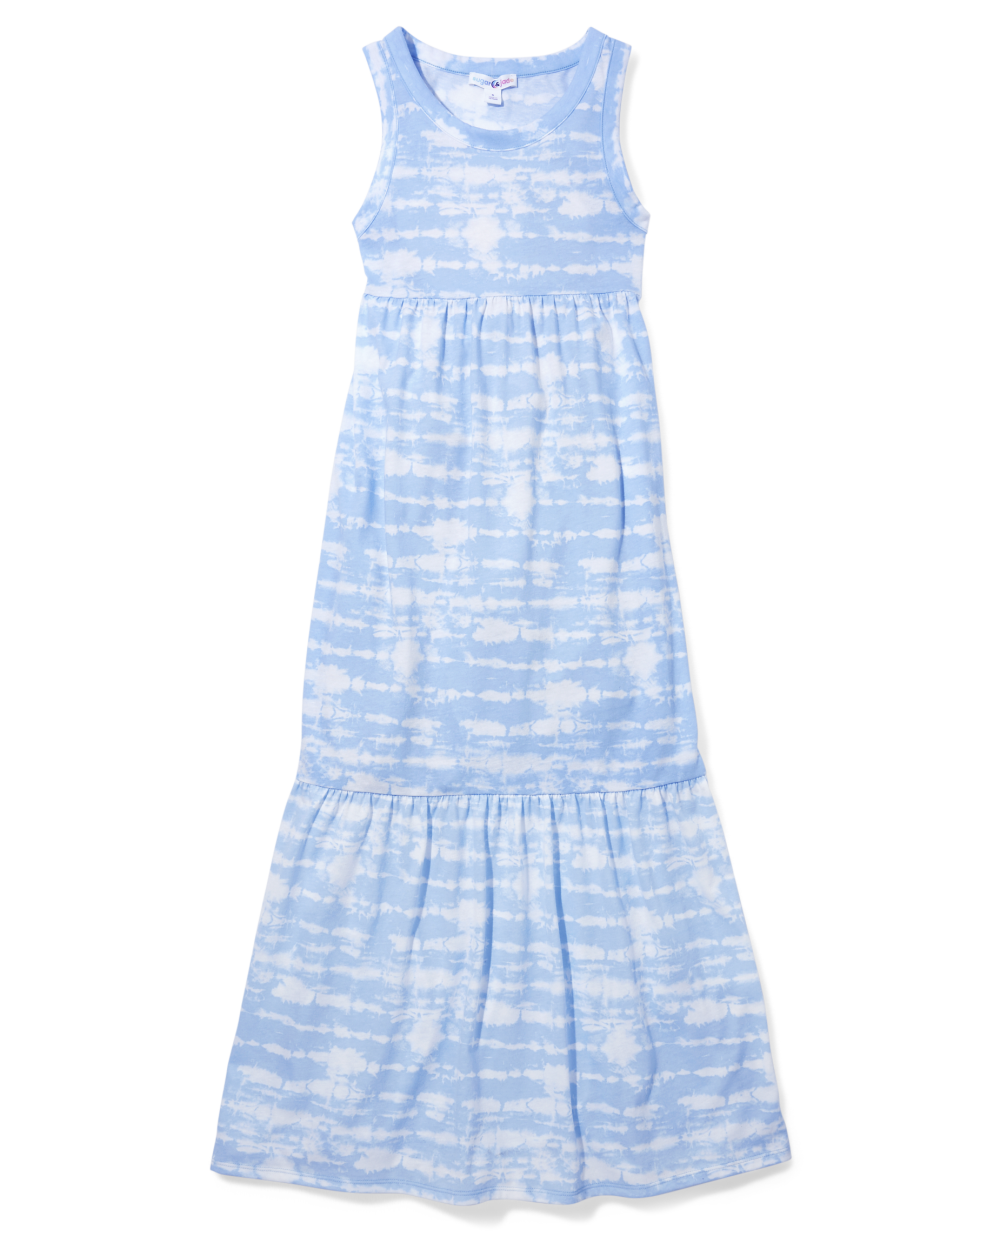 Girls Below the Knee Sleeveless Tank Tie Dye Print Round Neck Ruched Maxi Dress With Ruffles